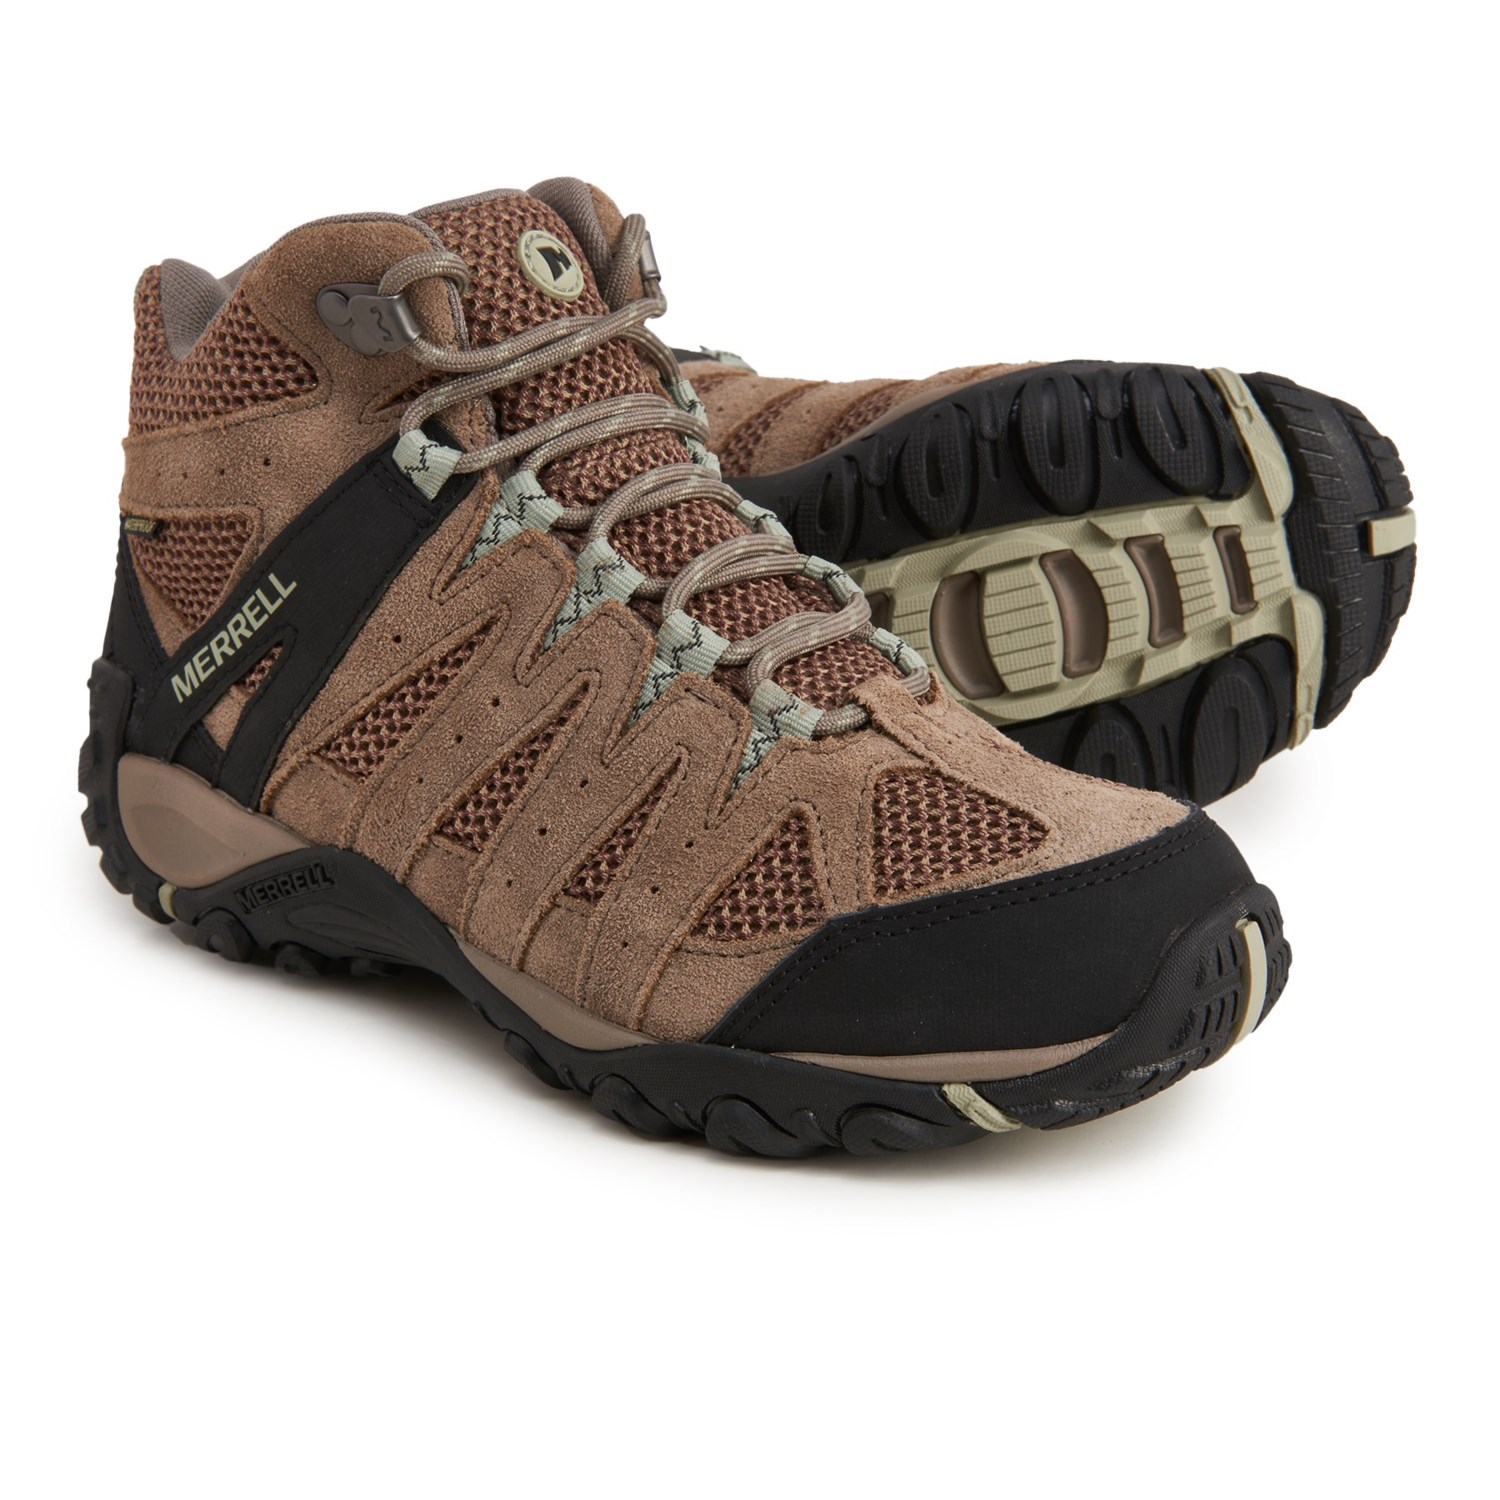 Merrell Accentor 2 Mid Vent Hiking Boots (For Women) - Save 27%